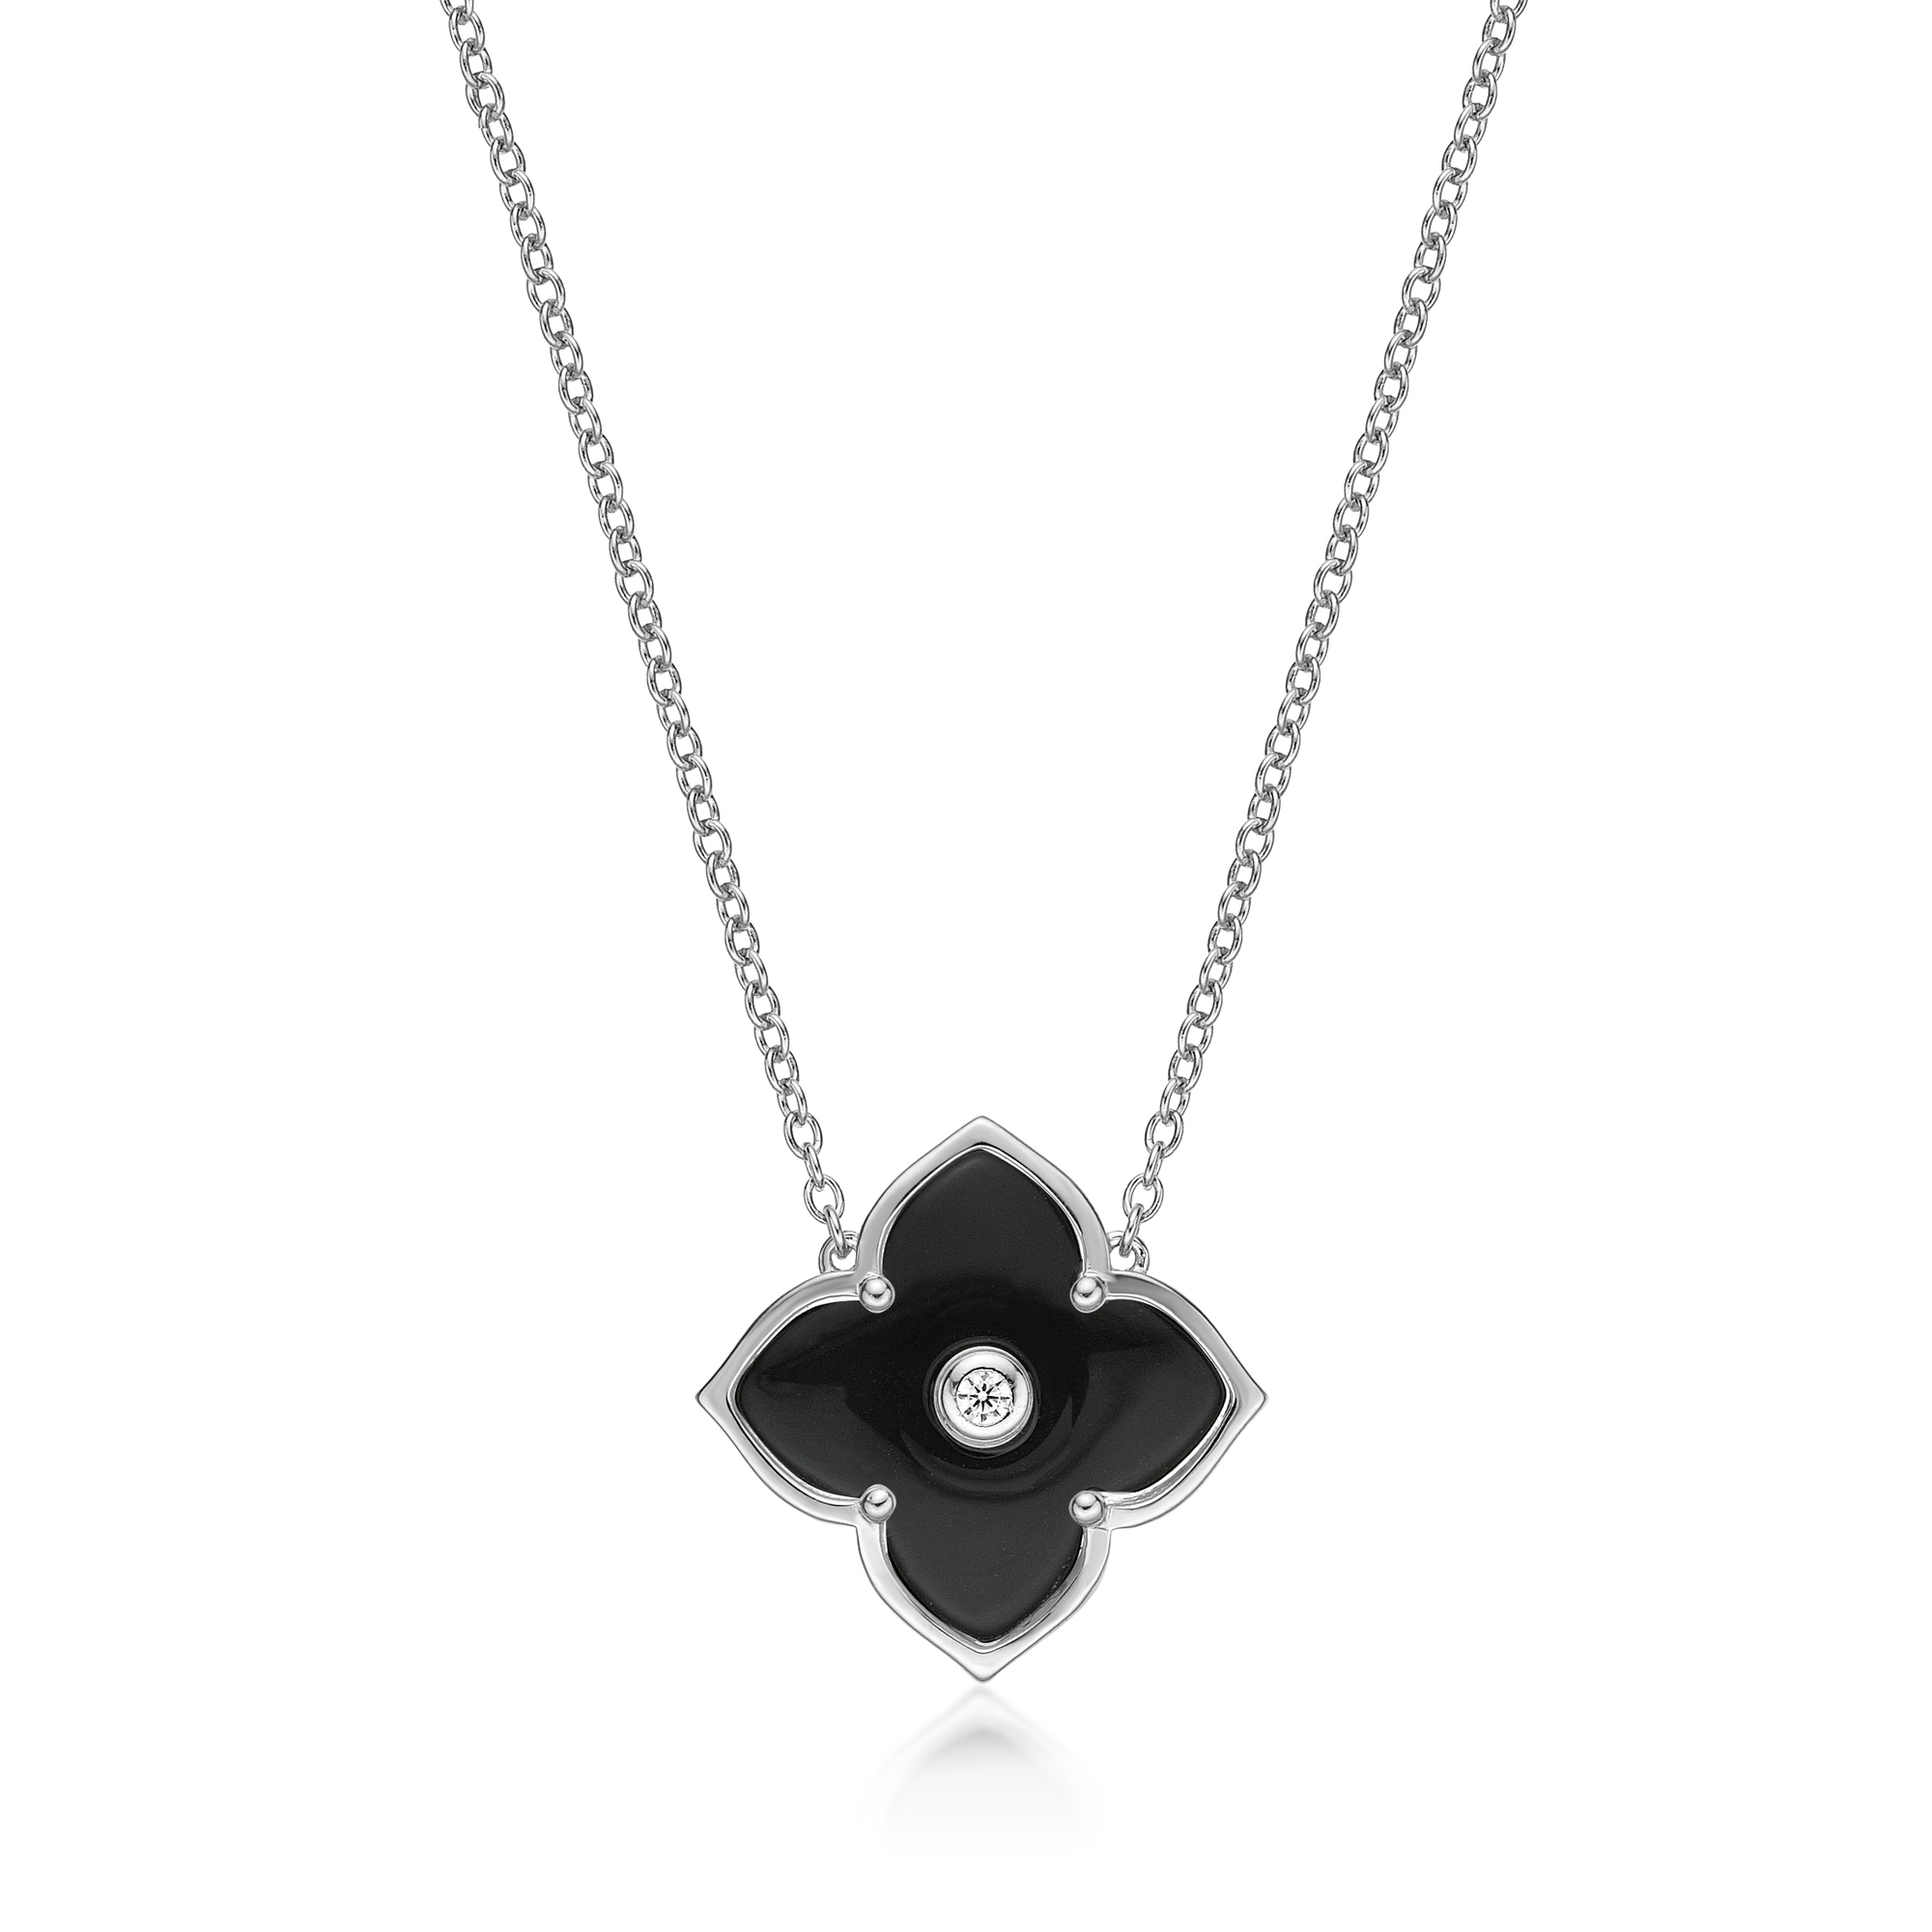 Lavari Jewelers Women's Black Onyx Flower Pendant with Lobster Clasp Necklace, 925 Sterling Silver, Cubic Zirconia, 18 Inch Adjustable Cable Chain